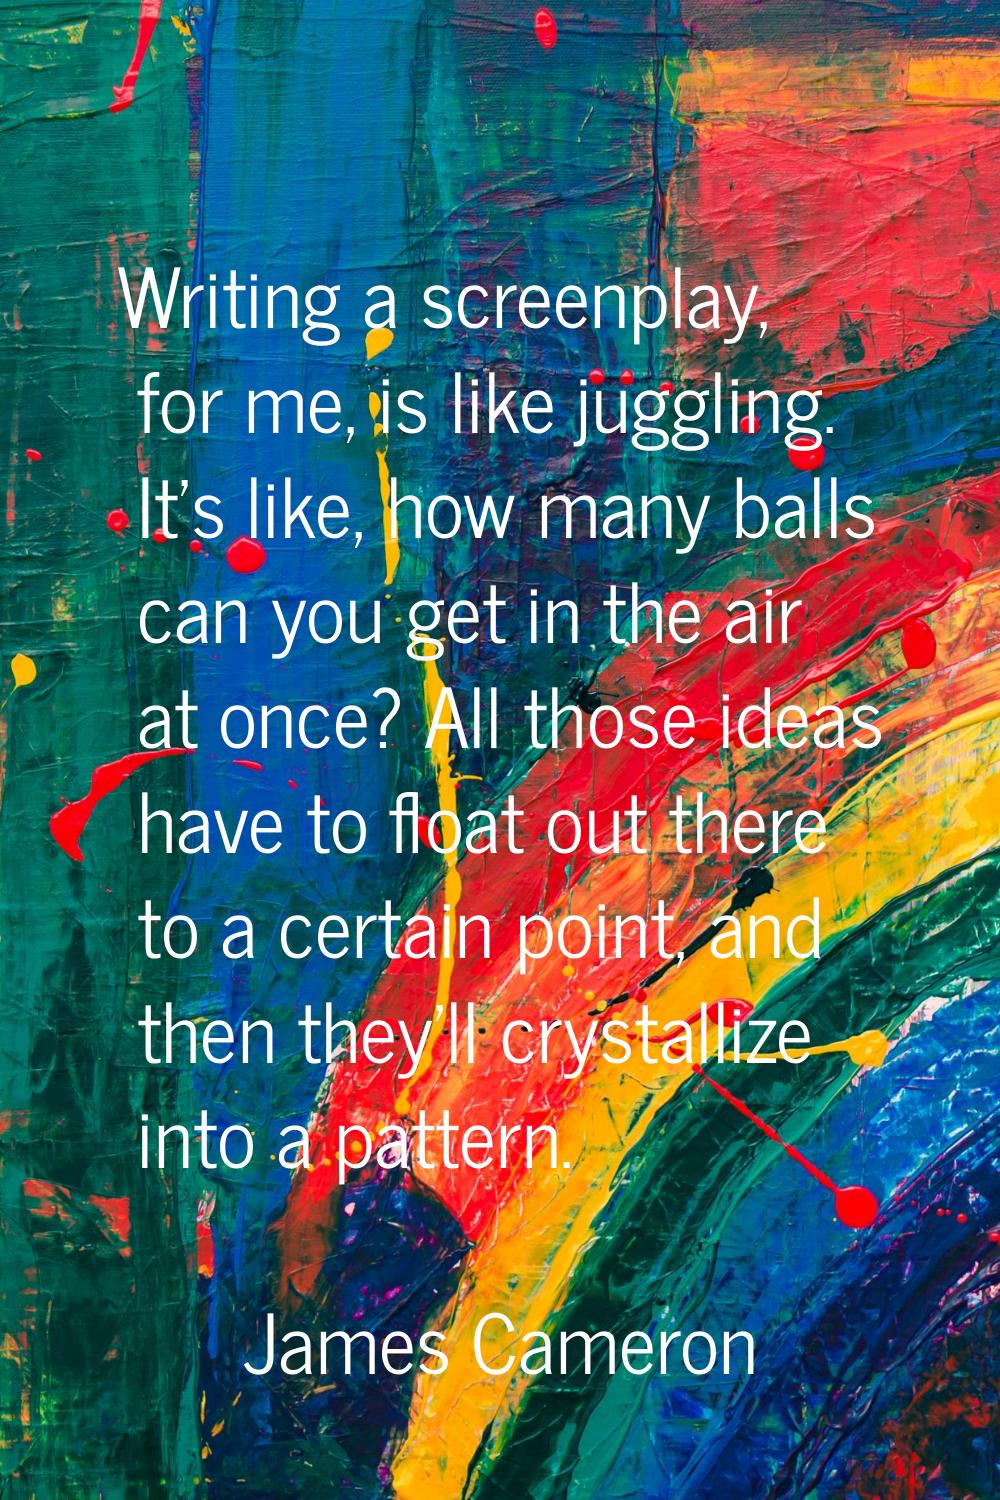 Writing a screenplay, for me, is like juggling. It's like, how many balls can you get in the air at